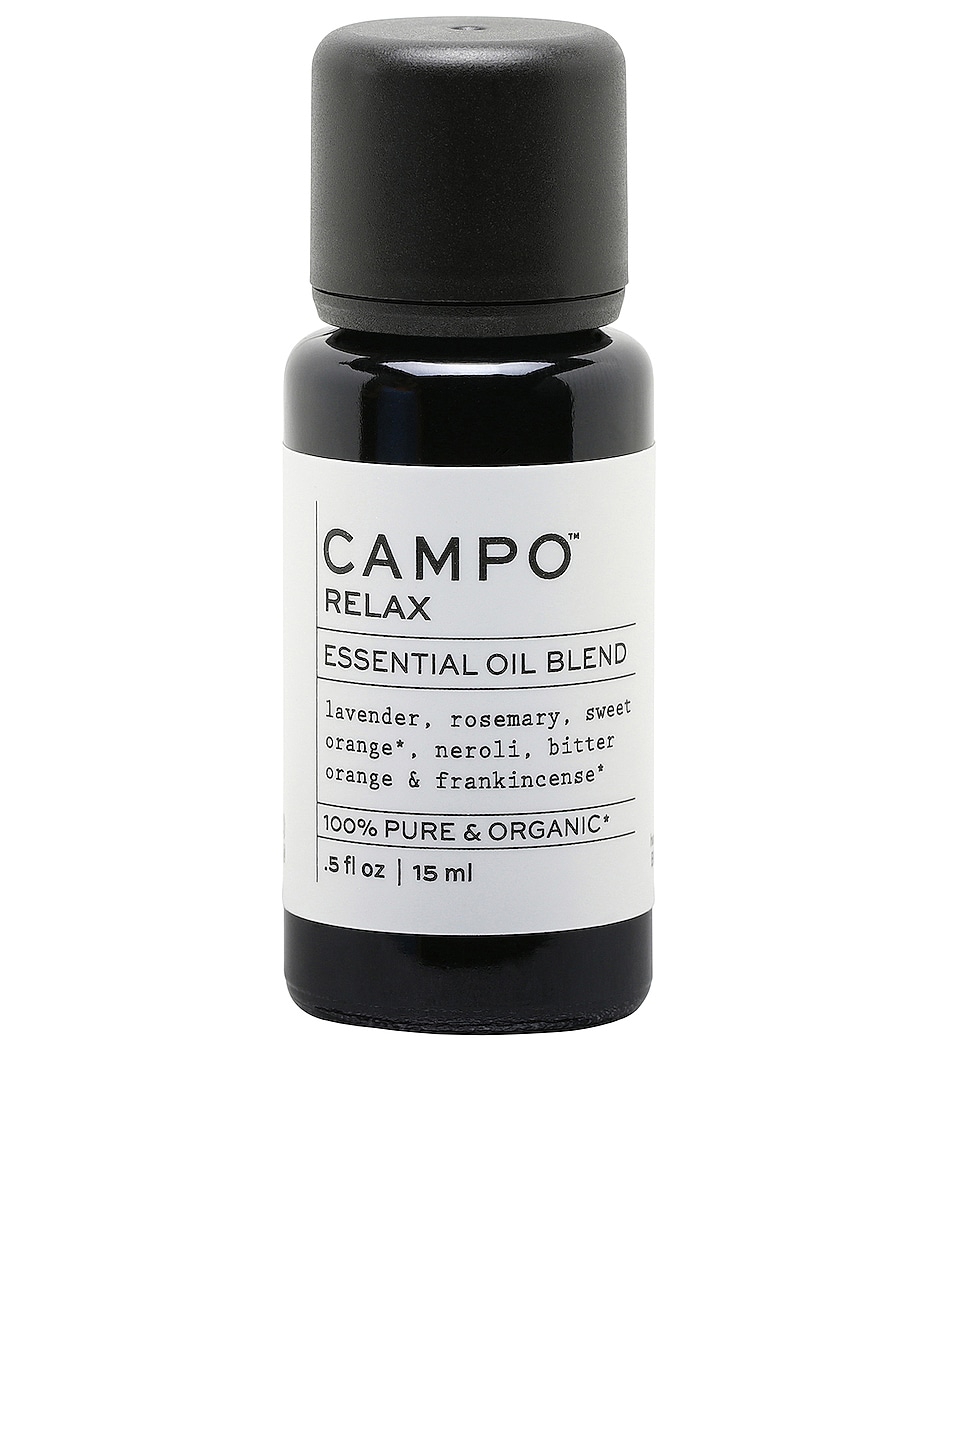 CAMPO RELAX-CALMING BLEND 100% PURE ESSENTIAL OIL BLEND,CAMR-WU4